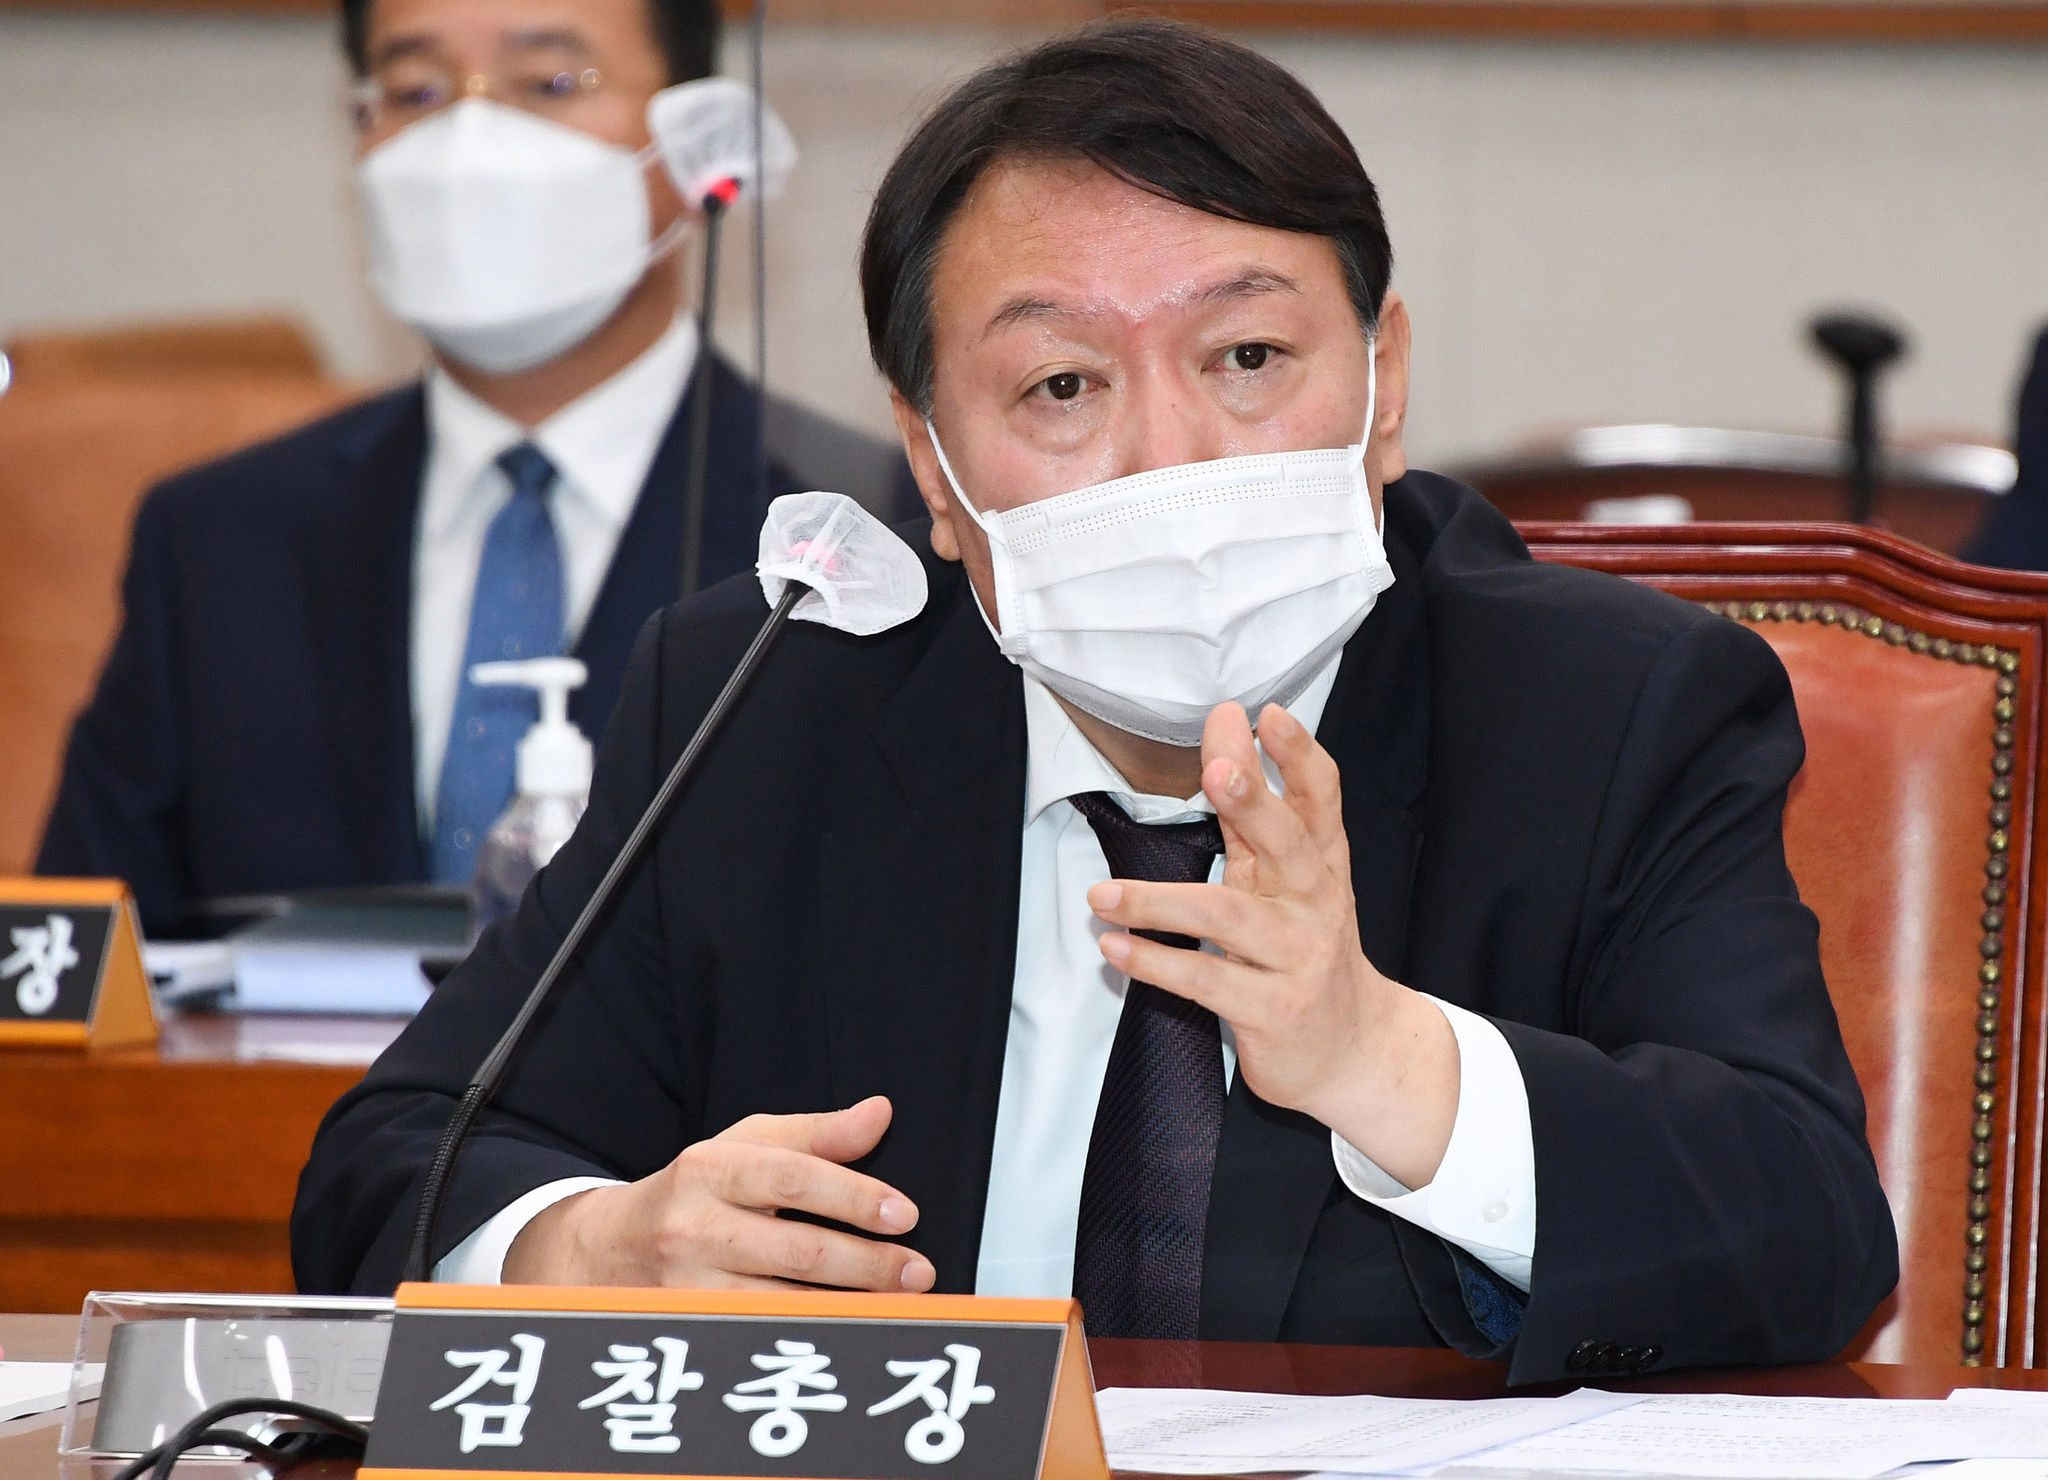 Prosecutor General Yoon Seok-youl answers questions from lawmakers in the National Assembly on Oct. 22. [JOONGANG PHOTO]